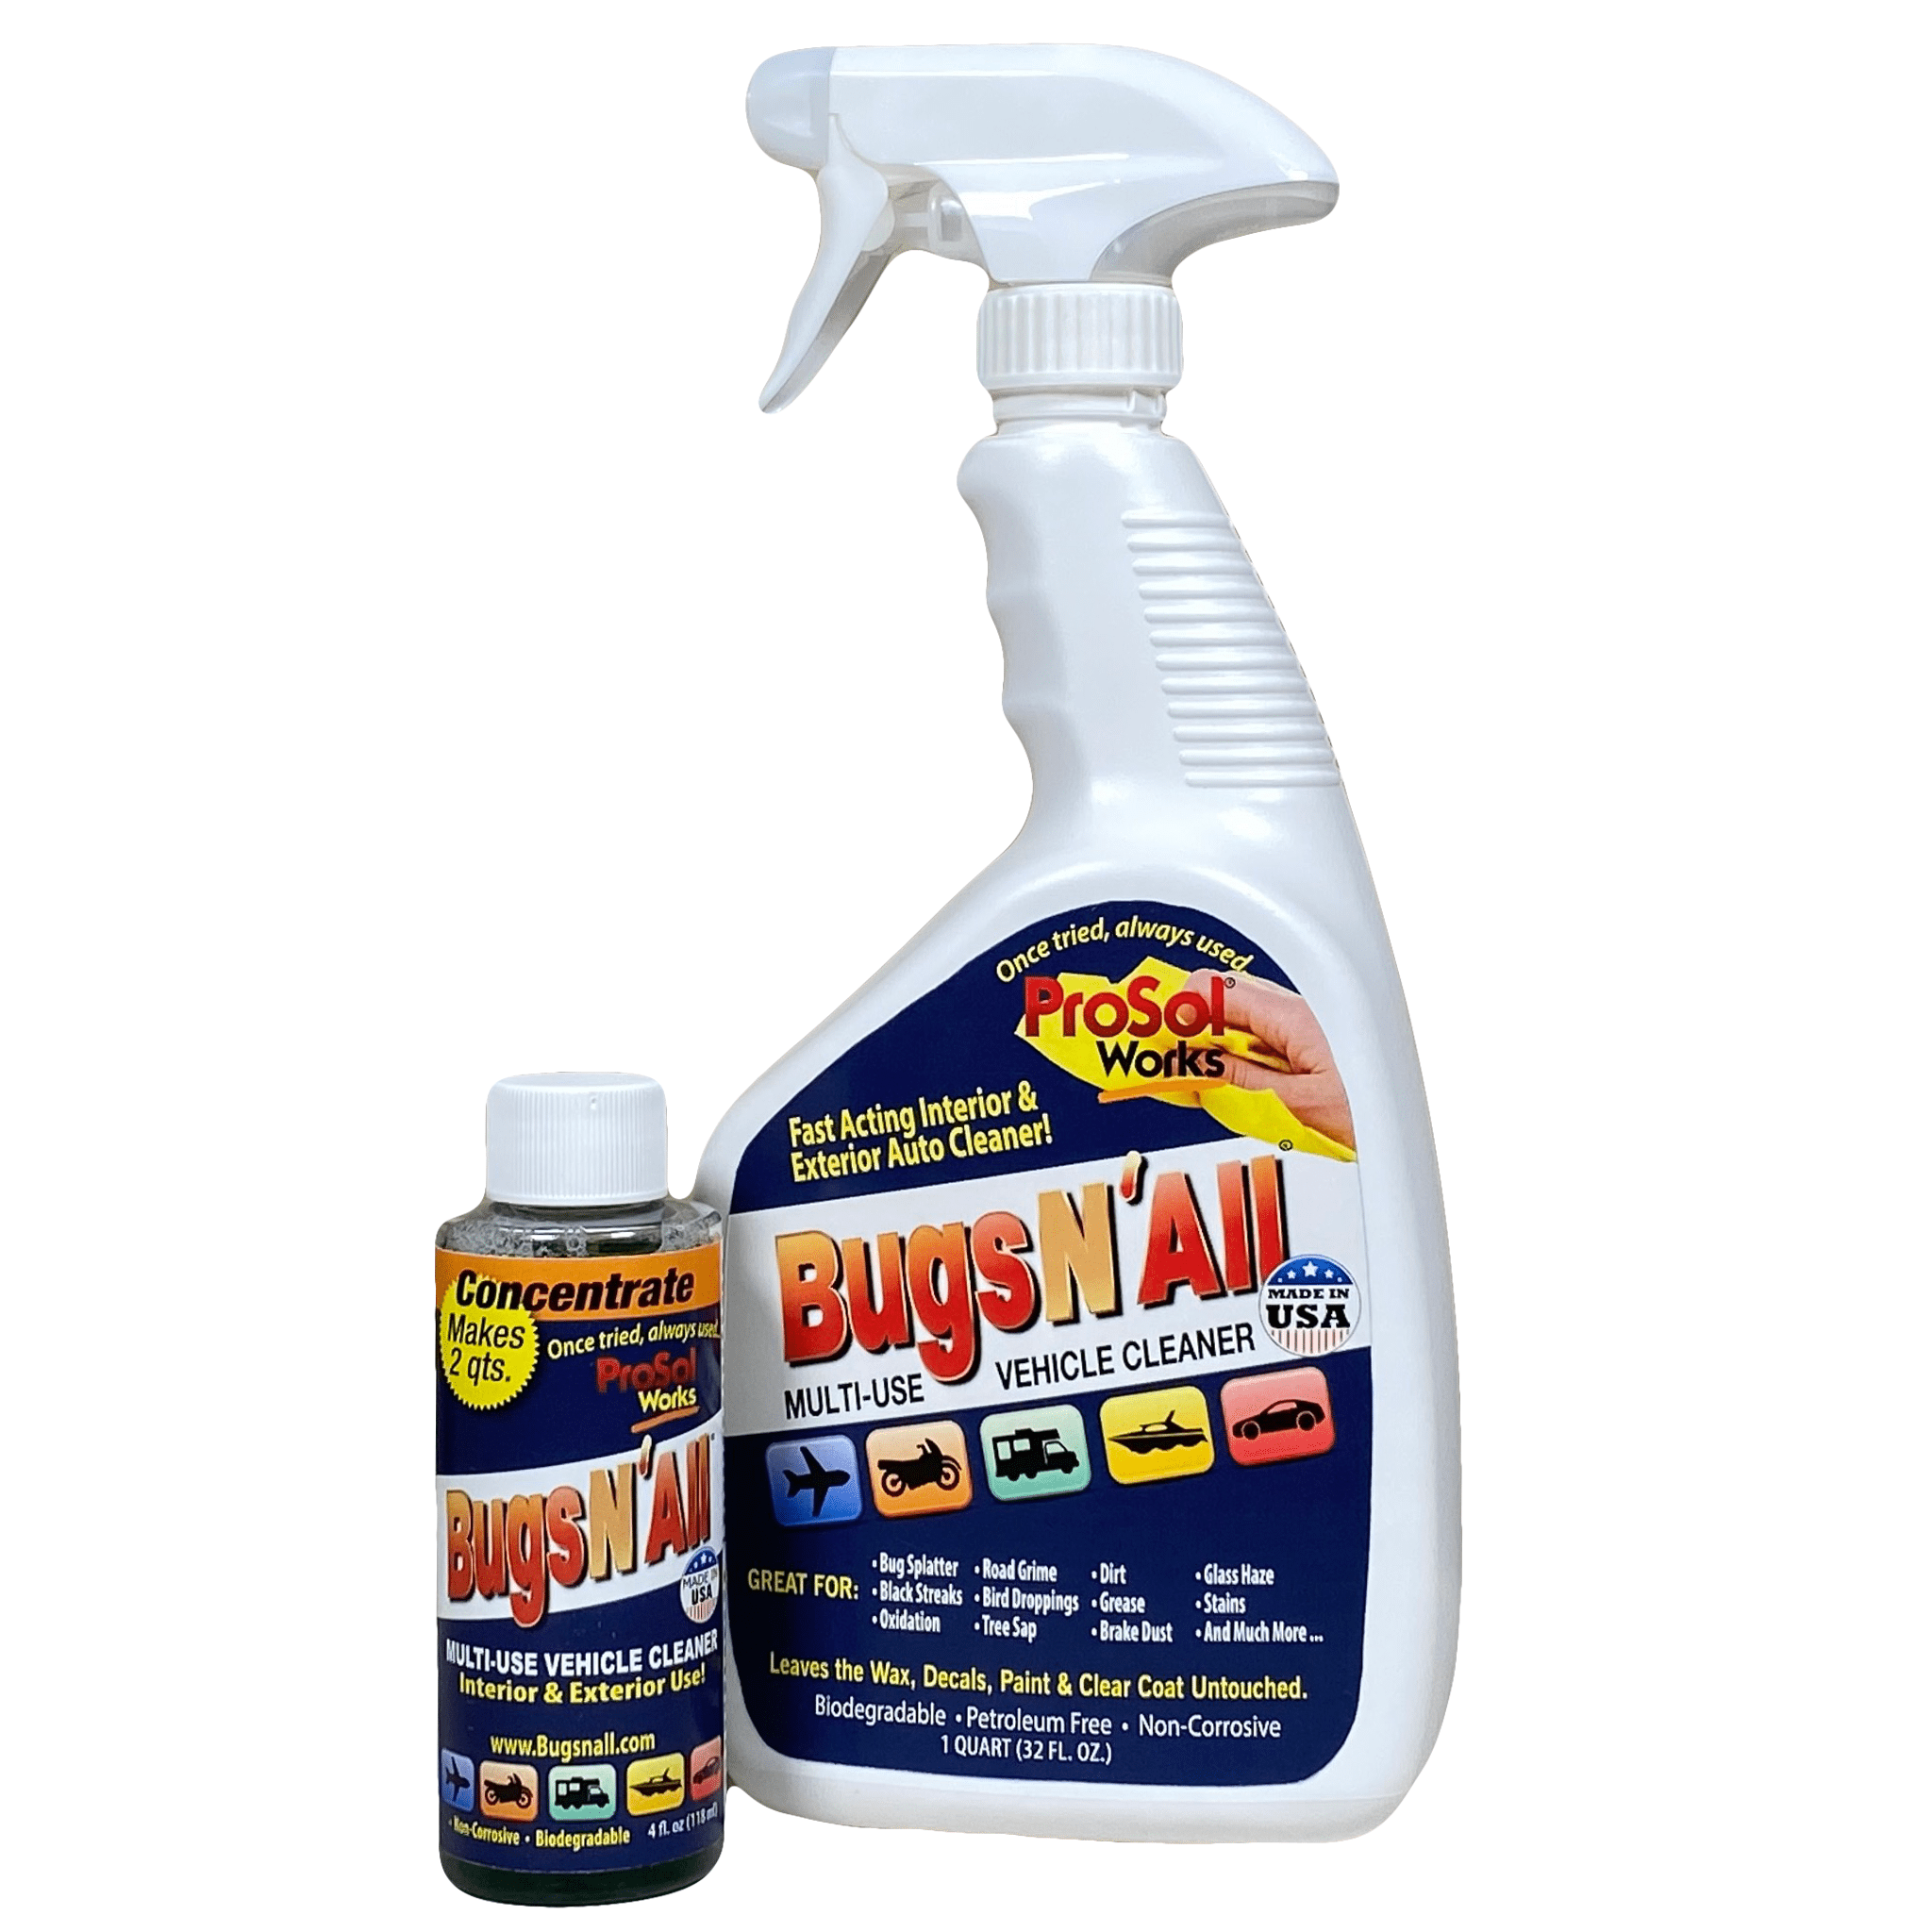 Optimum Power Clean - 1 Gallon, All Purpose Car Cleaner, Exterior and  Interior Car Cleaner, Car Leather Cleaner, Vinyl Cleaner, Bug and Tar  Remover, Great for Boat, Motorcycle, RV, and Car Detailing 